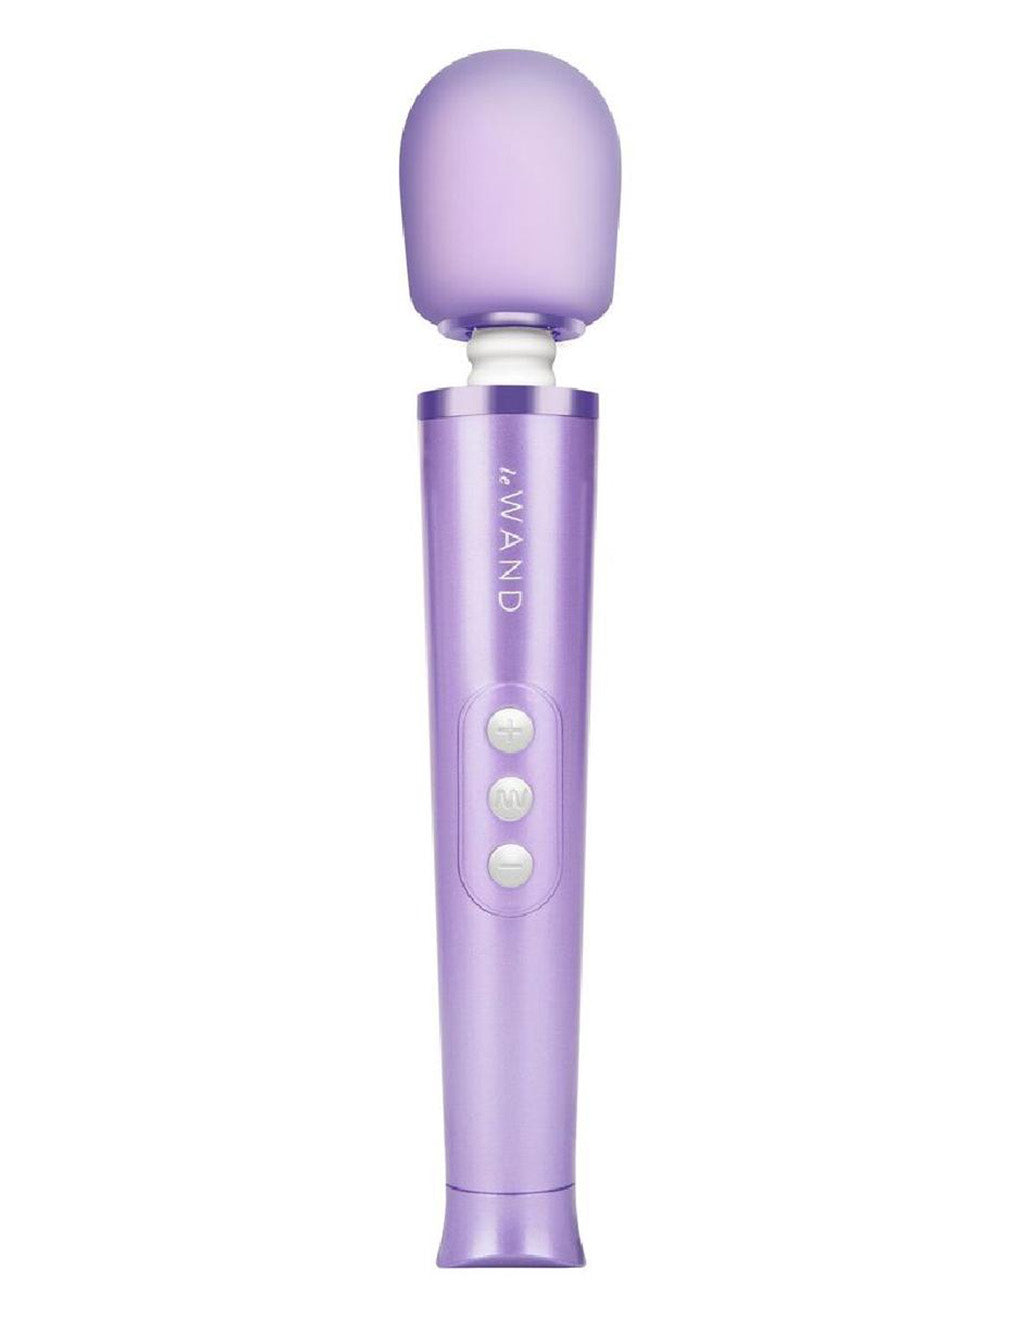 Le Wand Petite Rechargeable Wand Massager- Violet- Front